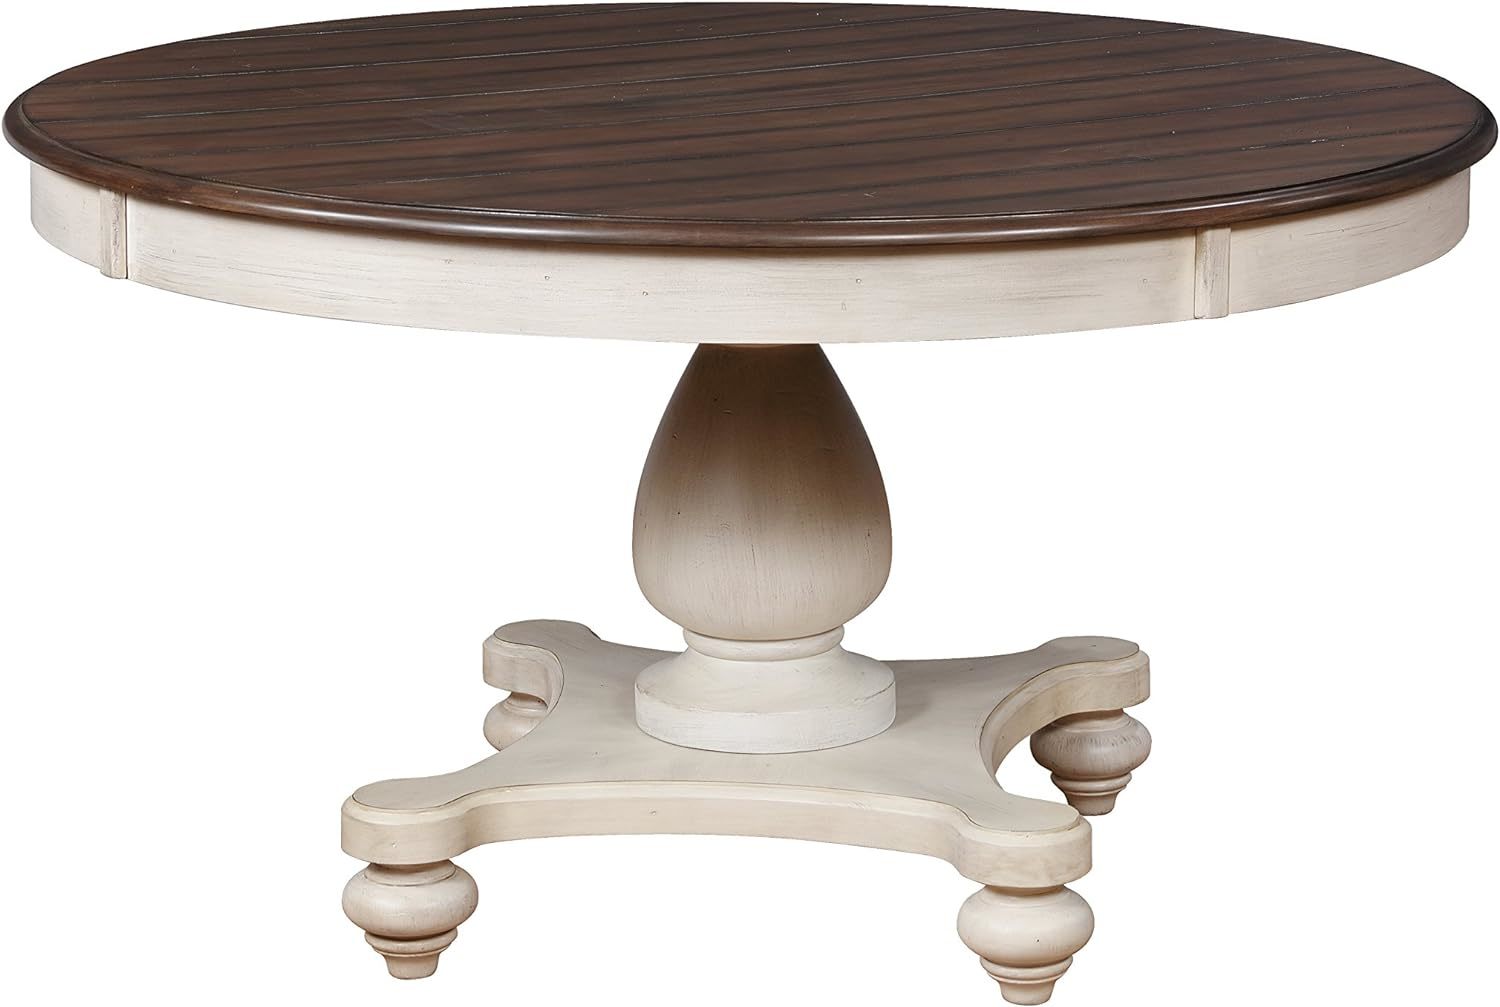 Roundhill Furniture Arch Weathered Round Dining Table Pedastal Base, Multicolor. - $704.97